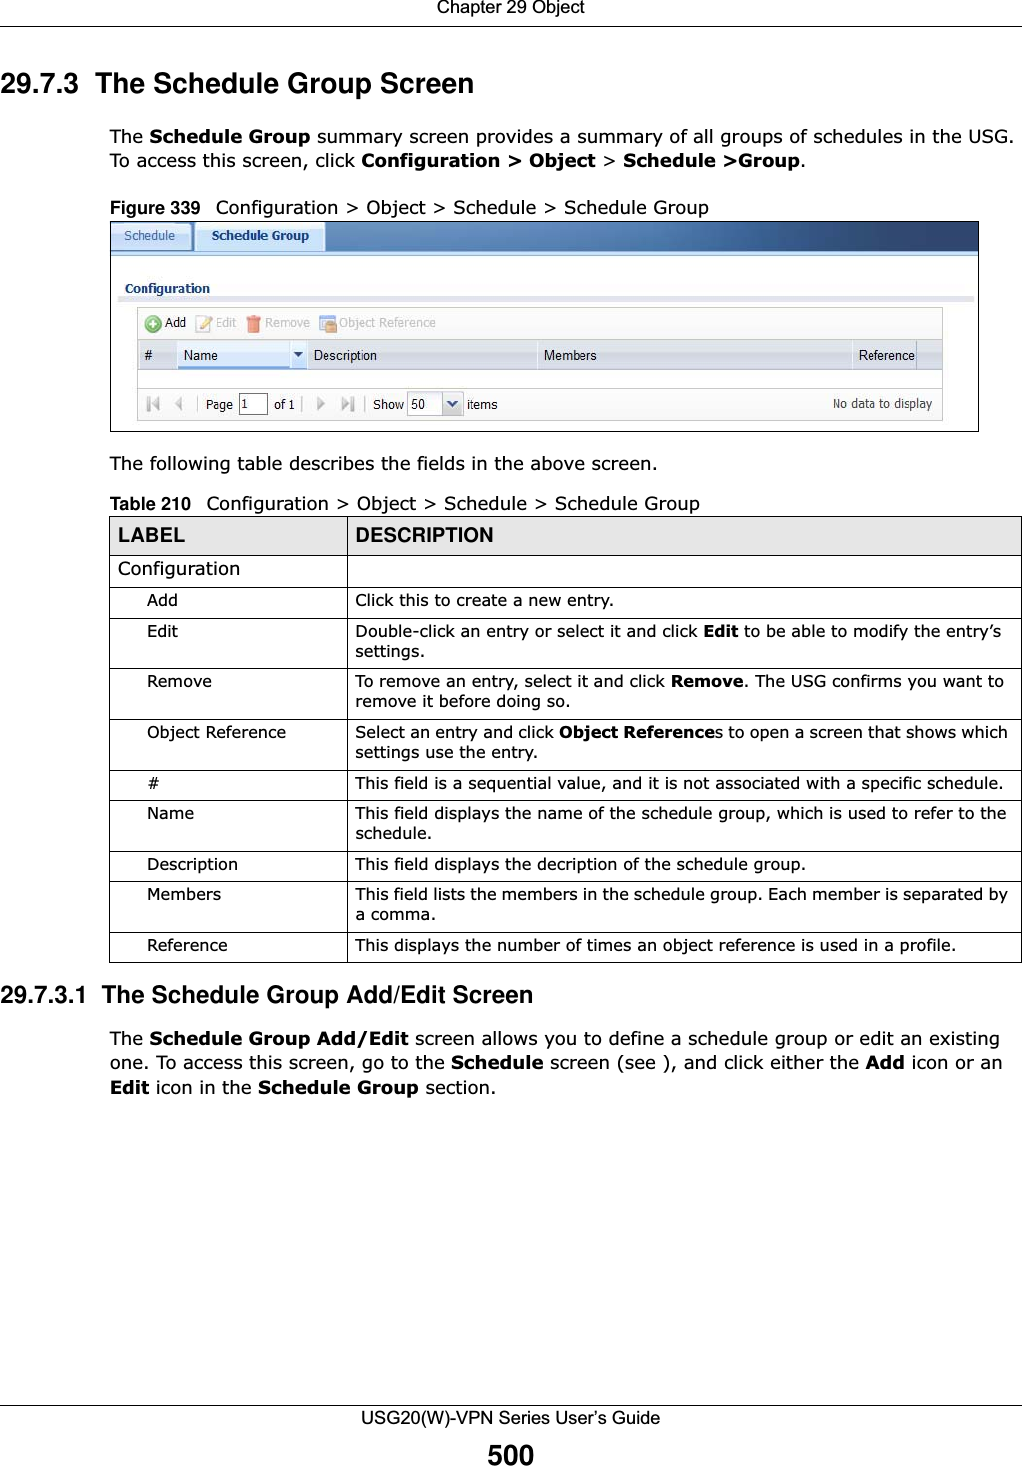 Chapter 29 ObjectUSG20(W)-VPN Series User’s Guide50029.7.3  The Schedule Group ScreenThe Schedule Group summary screen provides a summary of all groups of schedules in the USG. To access this screen, click Configuration &gt; Object &gt; Schedule &gt;Group.Figure 339   Configuration &gt; Object &gt; Schedule &gt; Schedule Group The following table describes the fields in the above screen. 29.7.3.1  The Schedule Group Add/Edit ScreenThe Schedule Group Add/Edit screen allows you to define a schedule group or edit an existing one. To access this screen, go to the Schedule screen (see ), and click either the Add icon or an Edit icon in the Schedule Group section.Table 210   Configuration &gt; Object &gt; Schedule &gt; Schedule GroupLABEL DESCRIPTIONConfigurationAdd Click this to create a new entry.Edit Double-click an entry or select it and click Edit to be able to modify the entry’s settings. Remove To remove an entry, select it and click Remove. The USG confirms you want to remove it before doing so.Object Reference Select an entry and click Object References to open a screen that shows which settings use the entry.# This field is a sequential value, and it is not associated with a specific schedule.Name This field displays the name of the schedule group, which is used to refer to the schedule.Description This field displays the decription of the schedule group.Members This field lists the members in the schedule group. Each member is separated by a comma.Reference This displays the number of times an object reference is used in a profile.